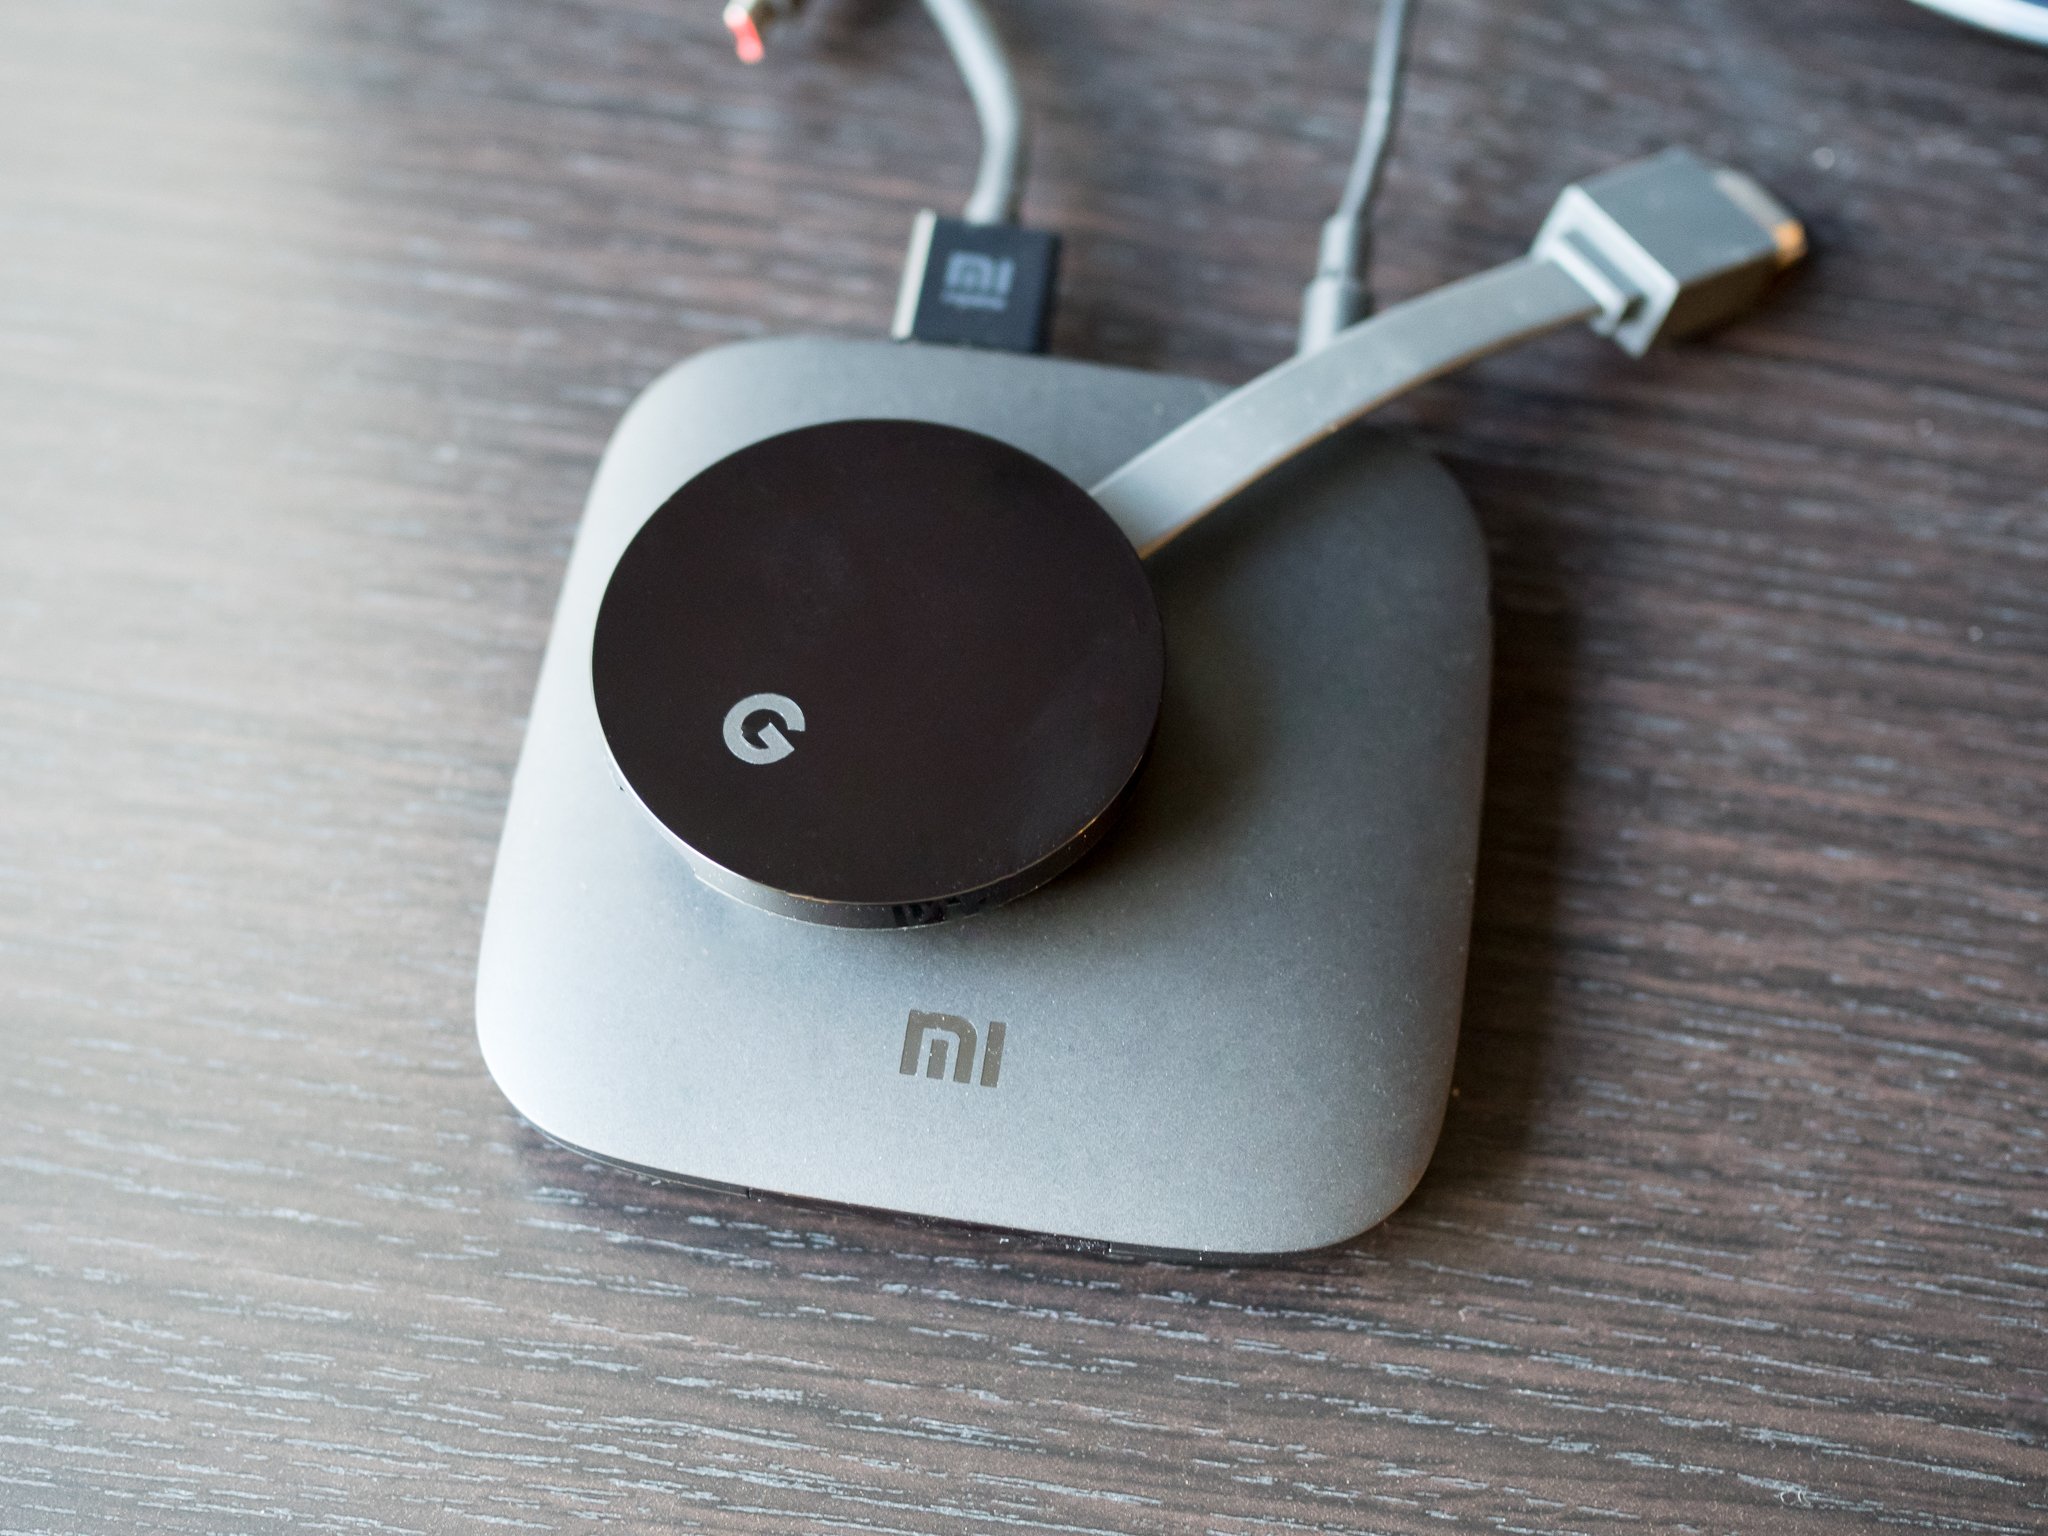 Chromecast vs. Xiaomi Which should buy? | Android Central